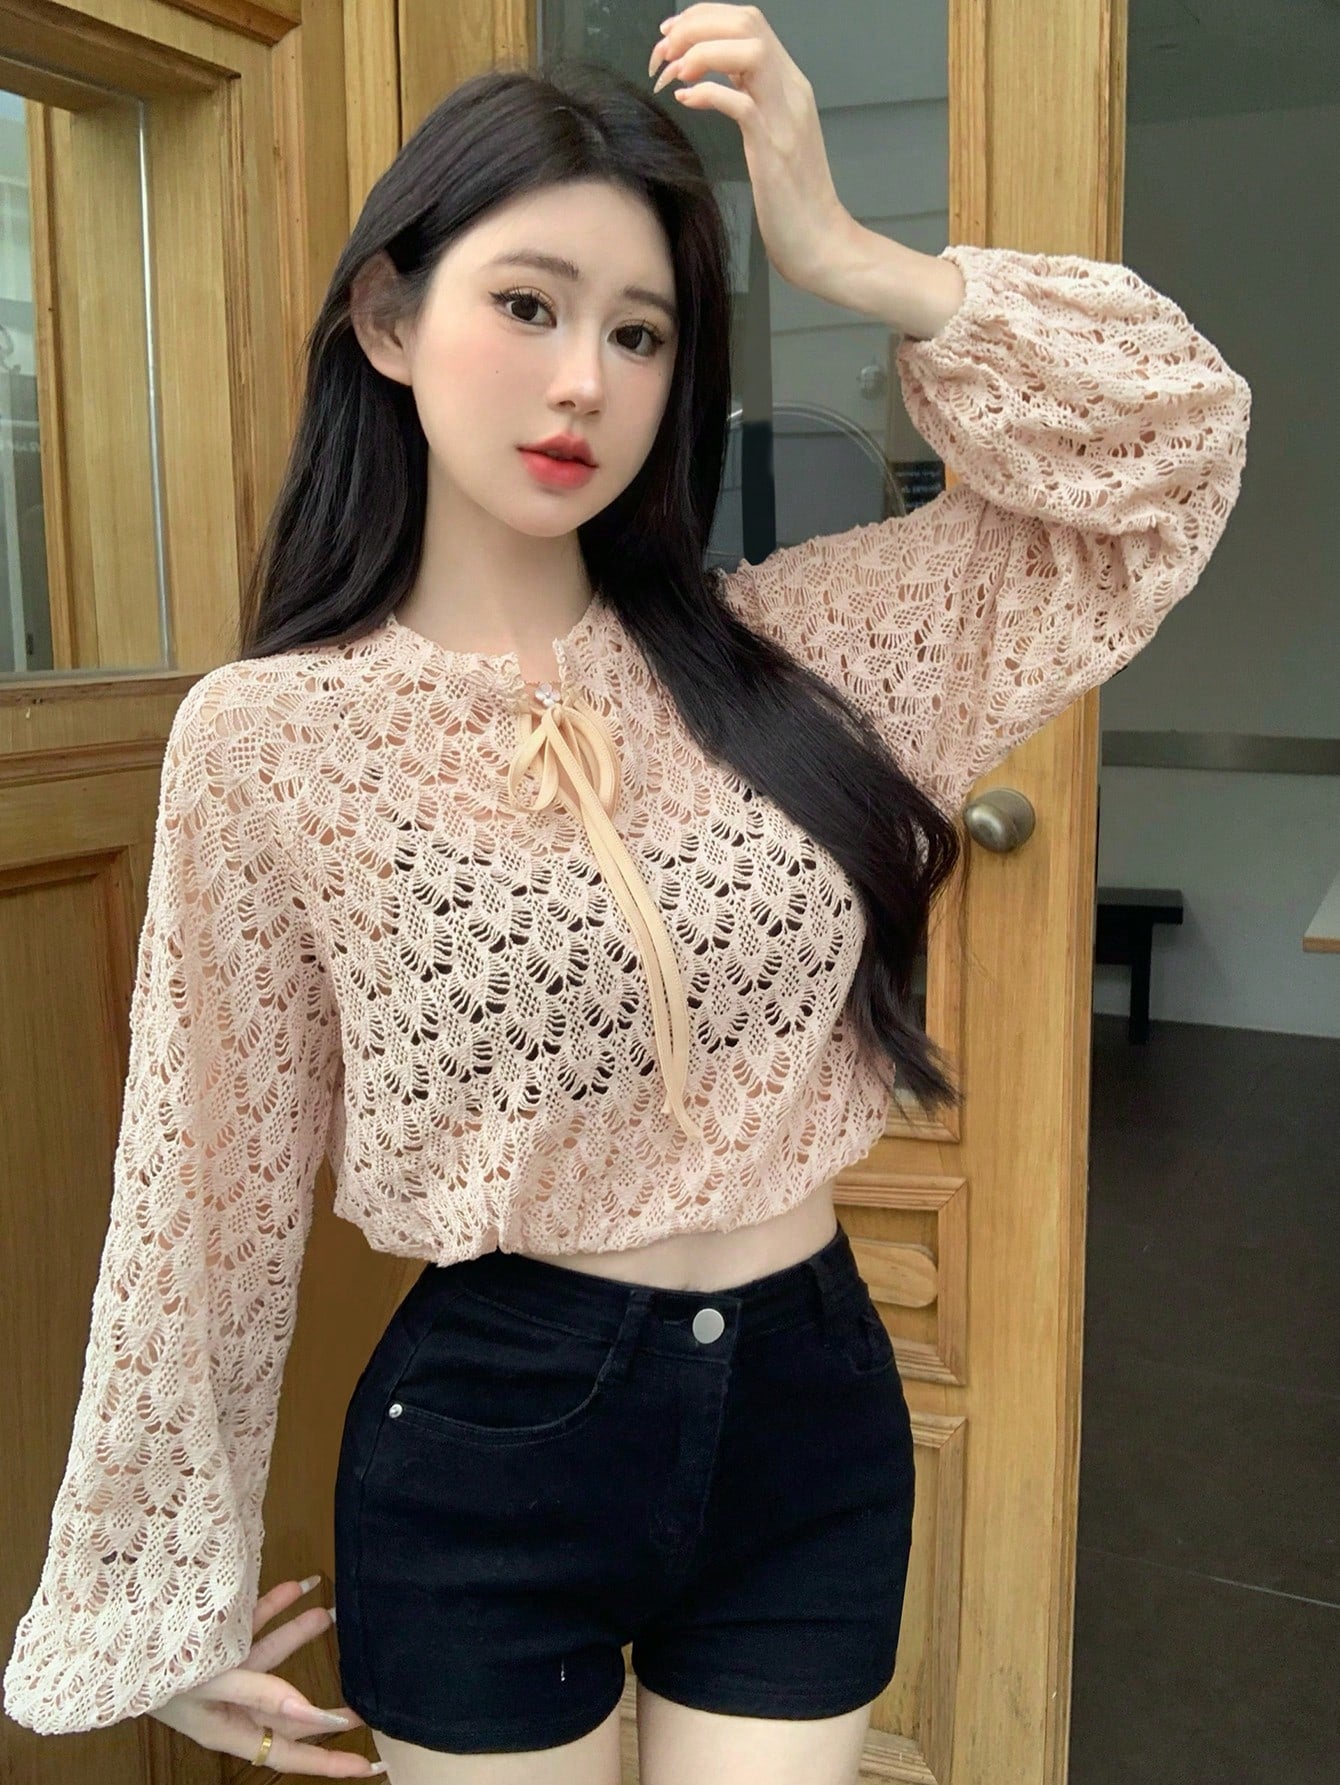 Women Hollow Out Round Neckline Drawstring Design Long Sleeve Top